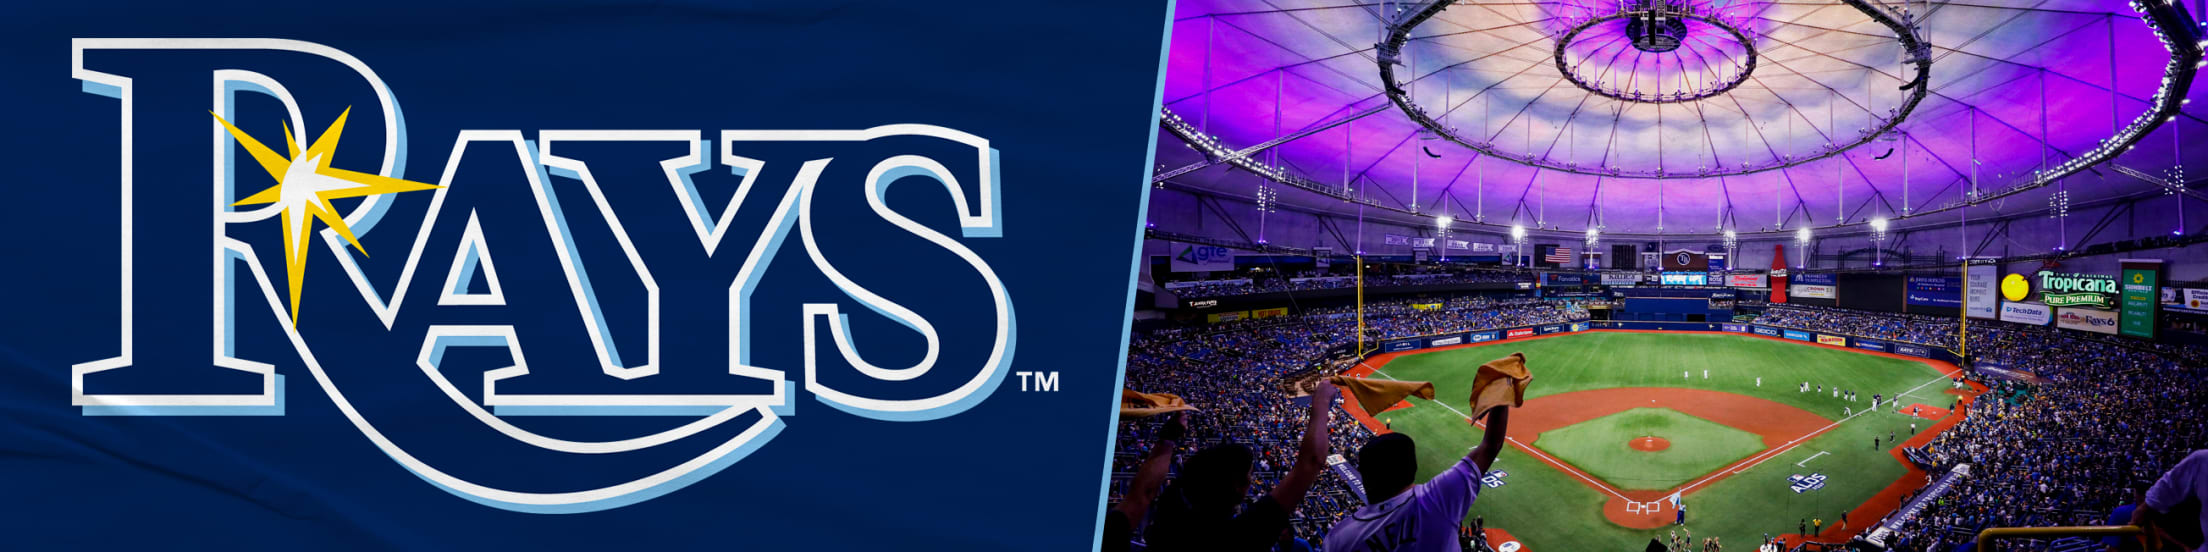 Tampa Bay Rays - If you are a Rays fan, please join the